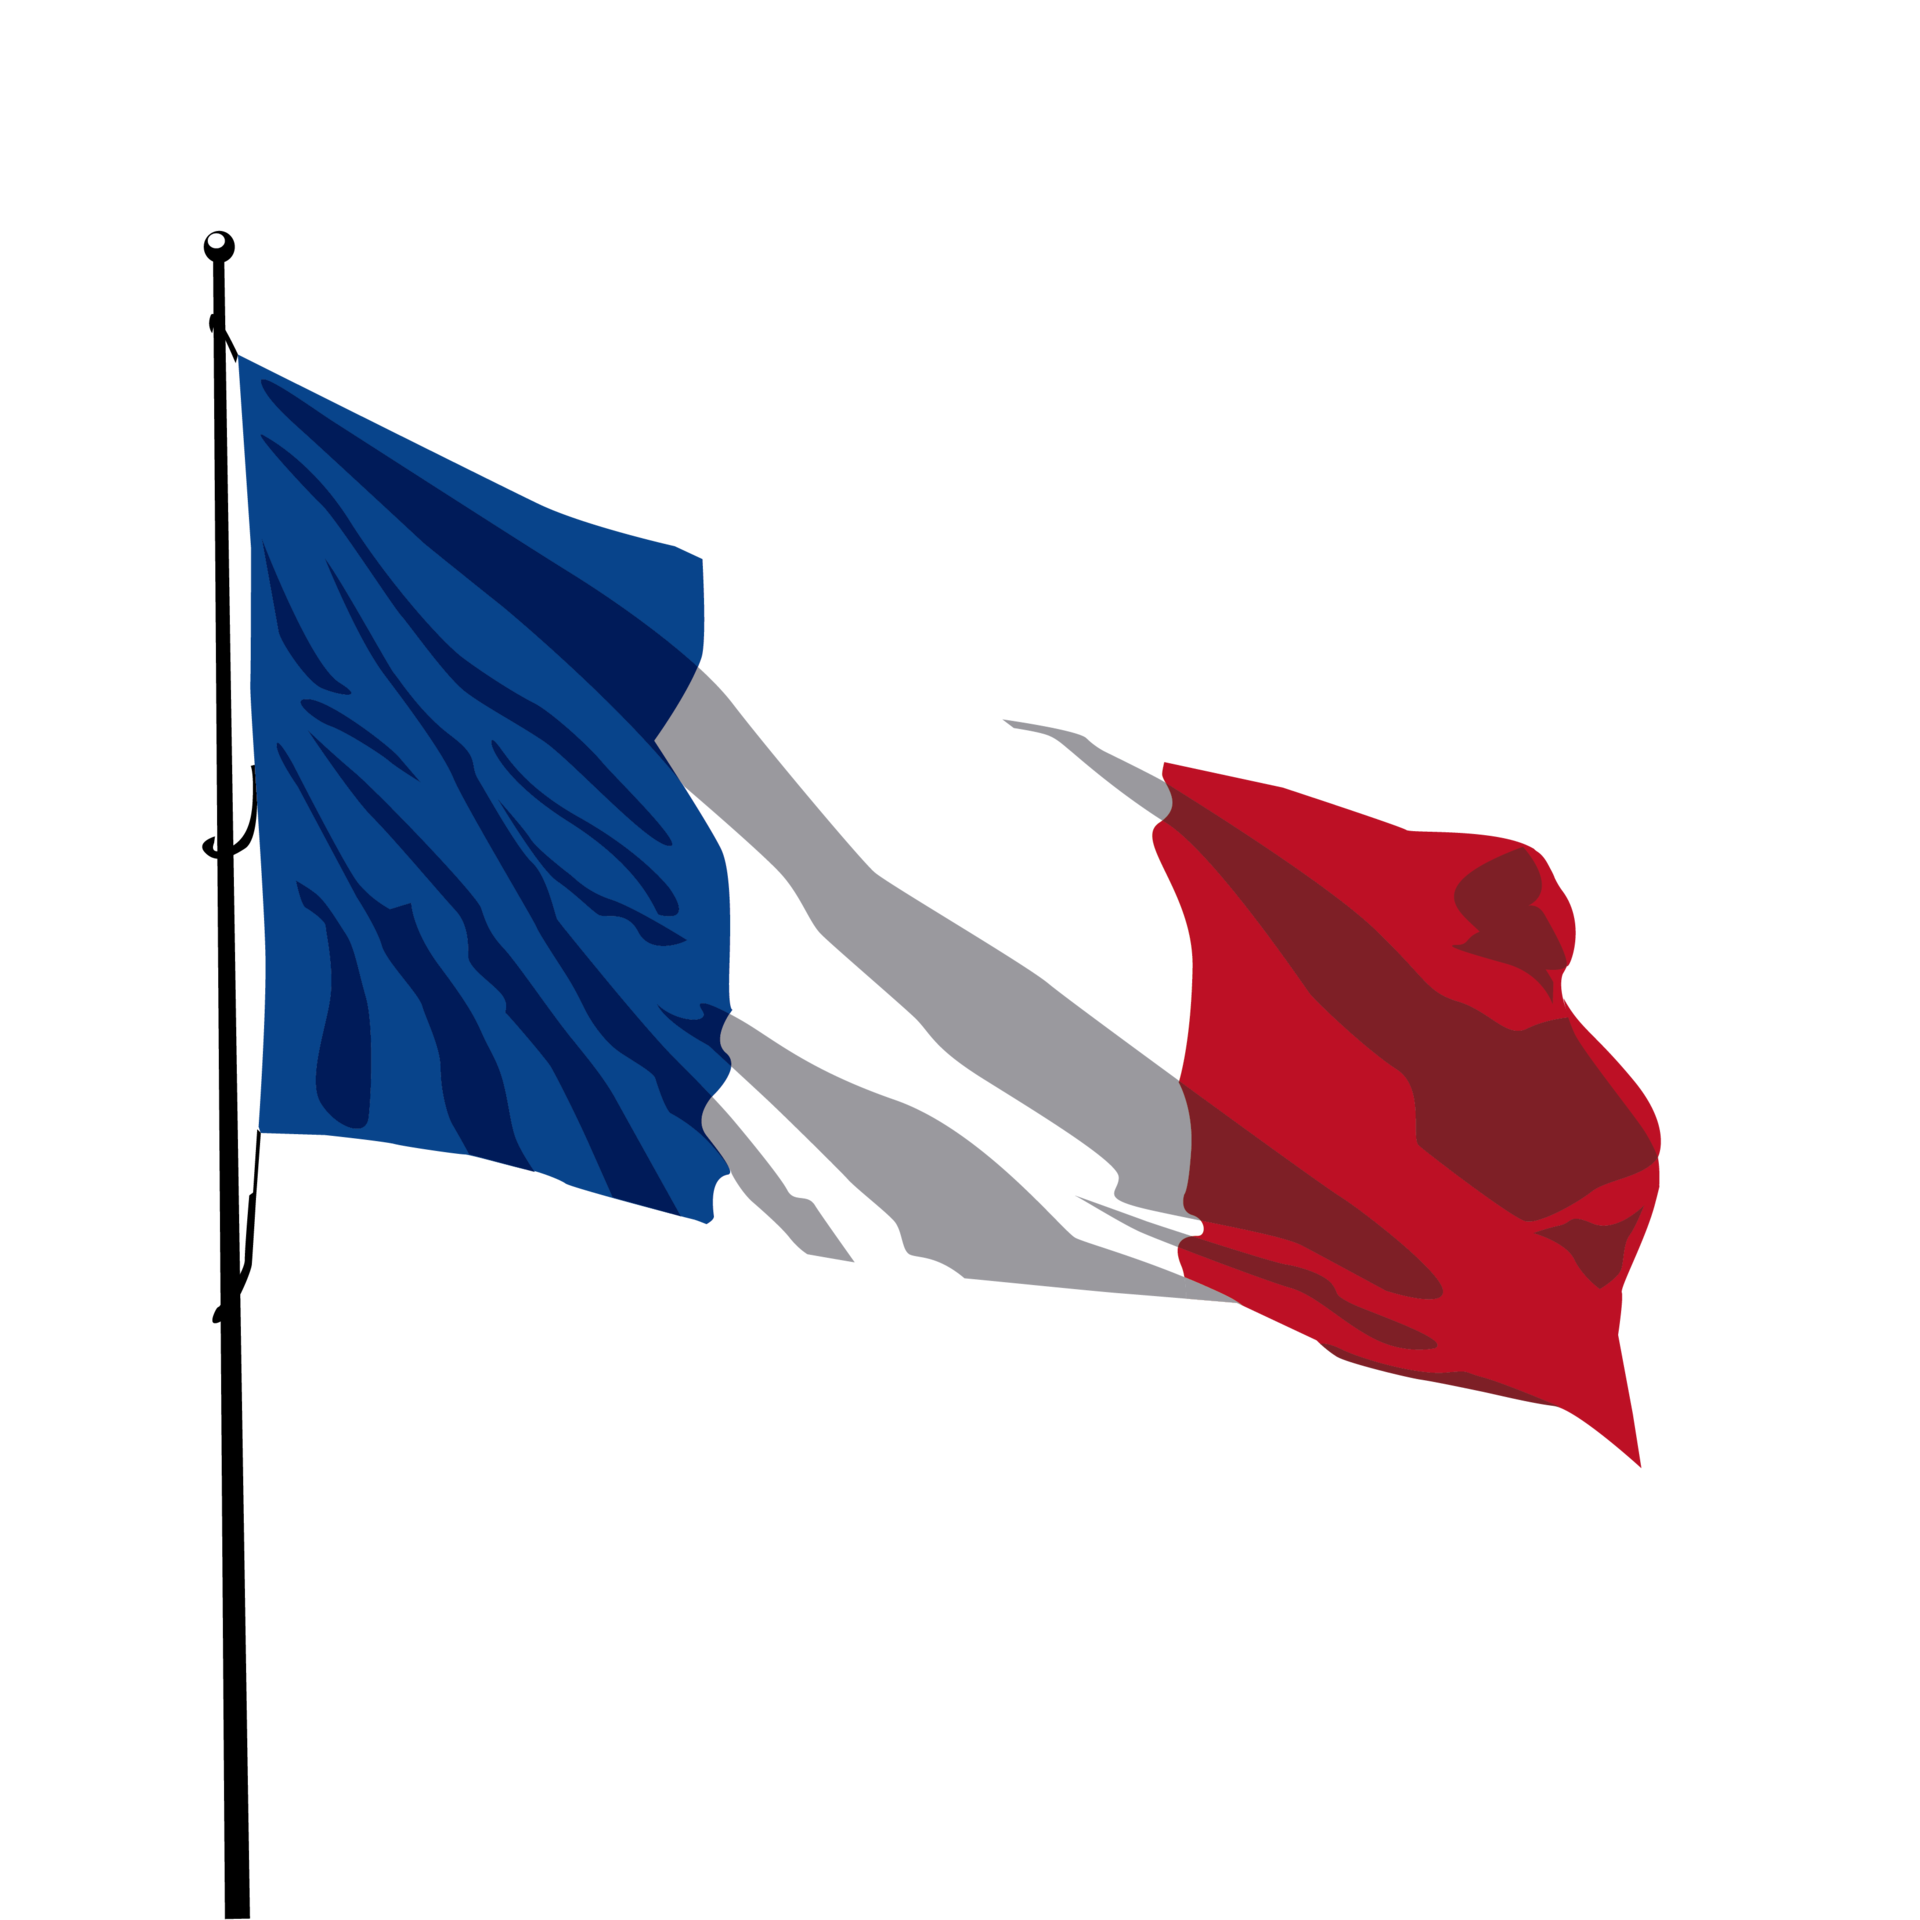 https://static.vecteezy.com/system/resources/previews/016/720/428/original/france-flag-french-flag-wind-flag-revolution-war-french-revolution-revolution-flag-png.png